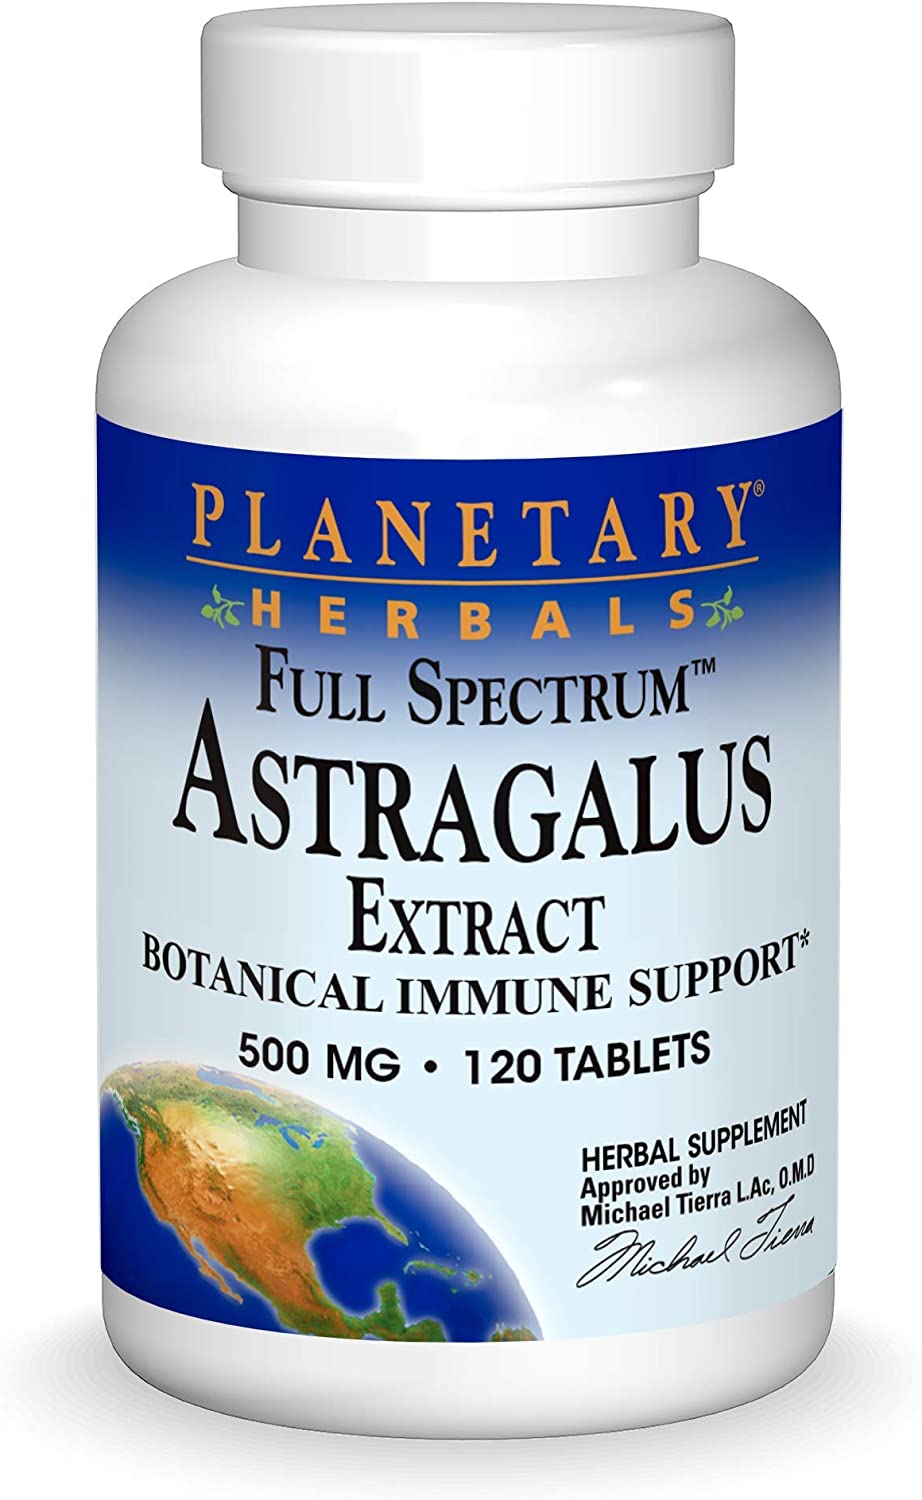 Planetary Herbals Full Spectrum Astragalus Extract 500mg 120 tablets Botanical for Immune System Support